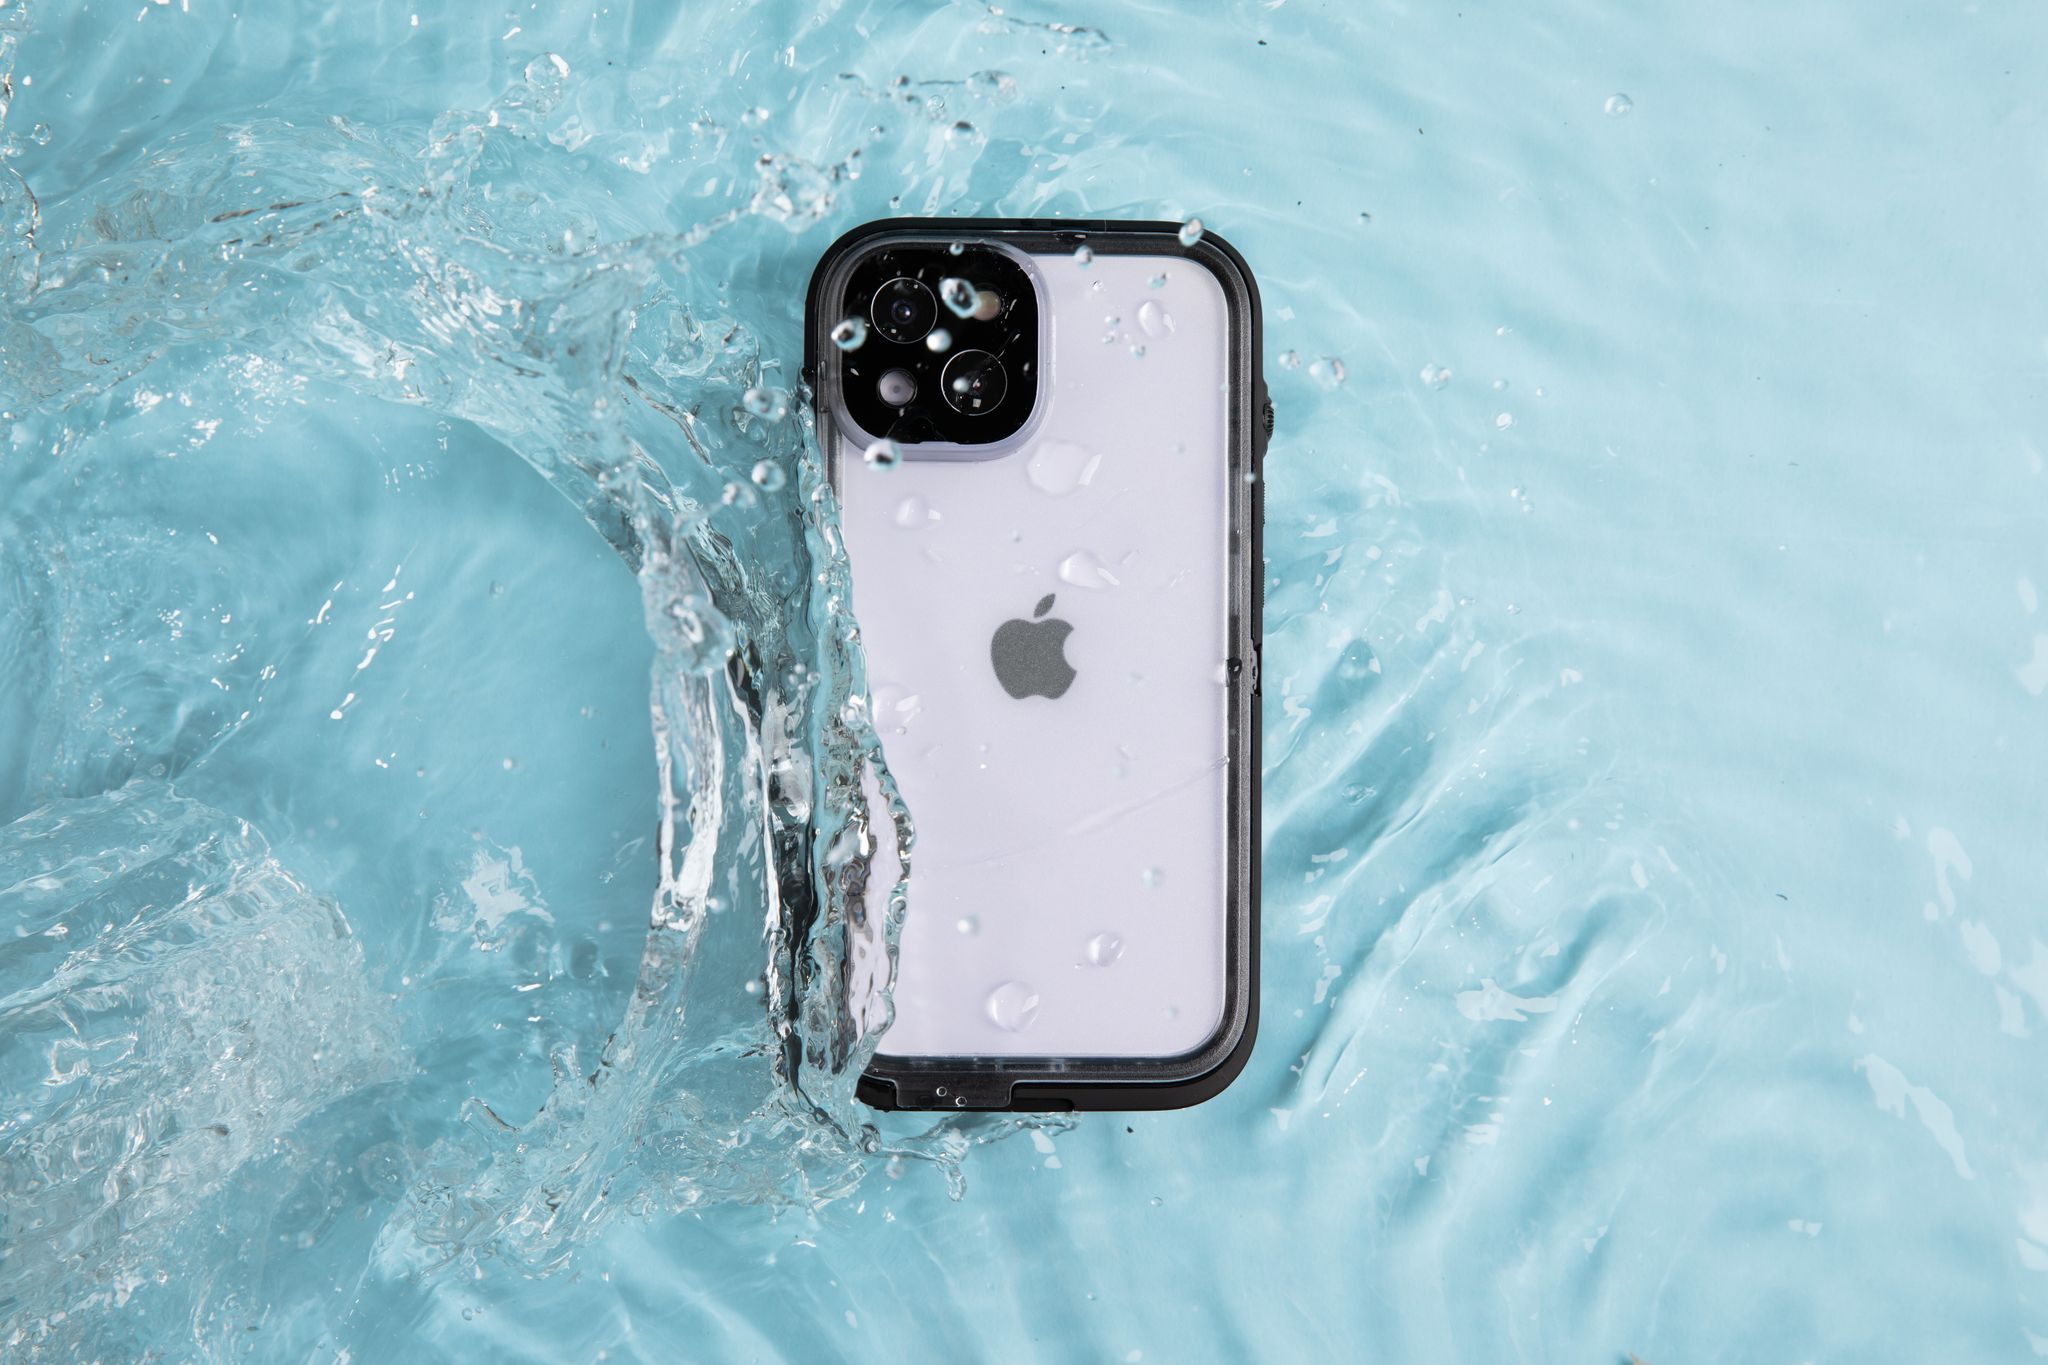 iPhone 14 Waterproof Case protecting iPhone from water